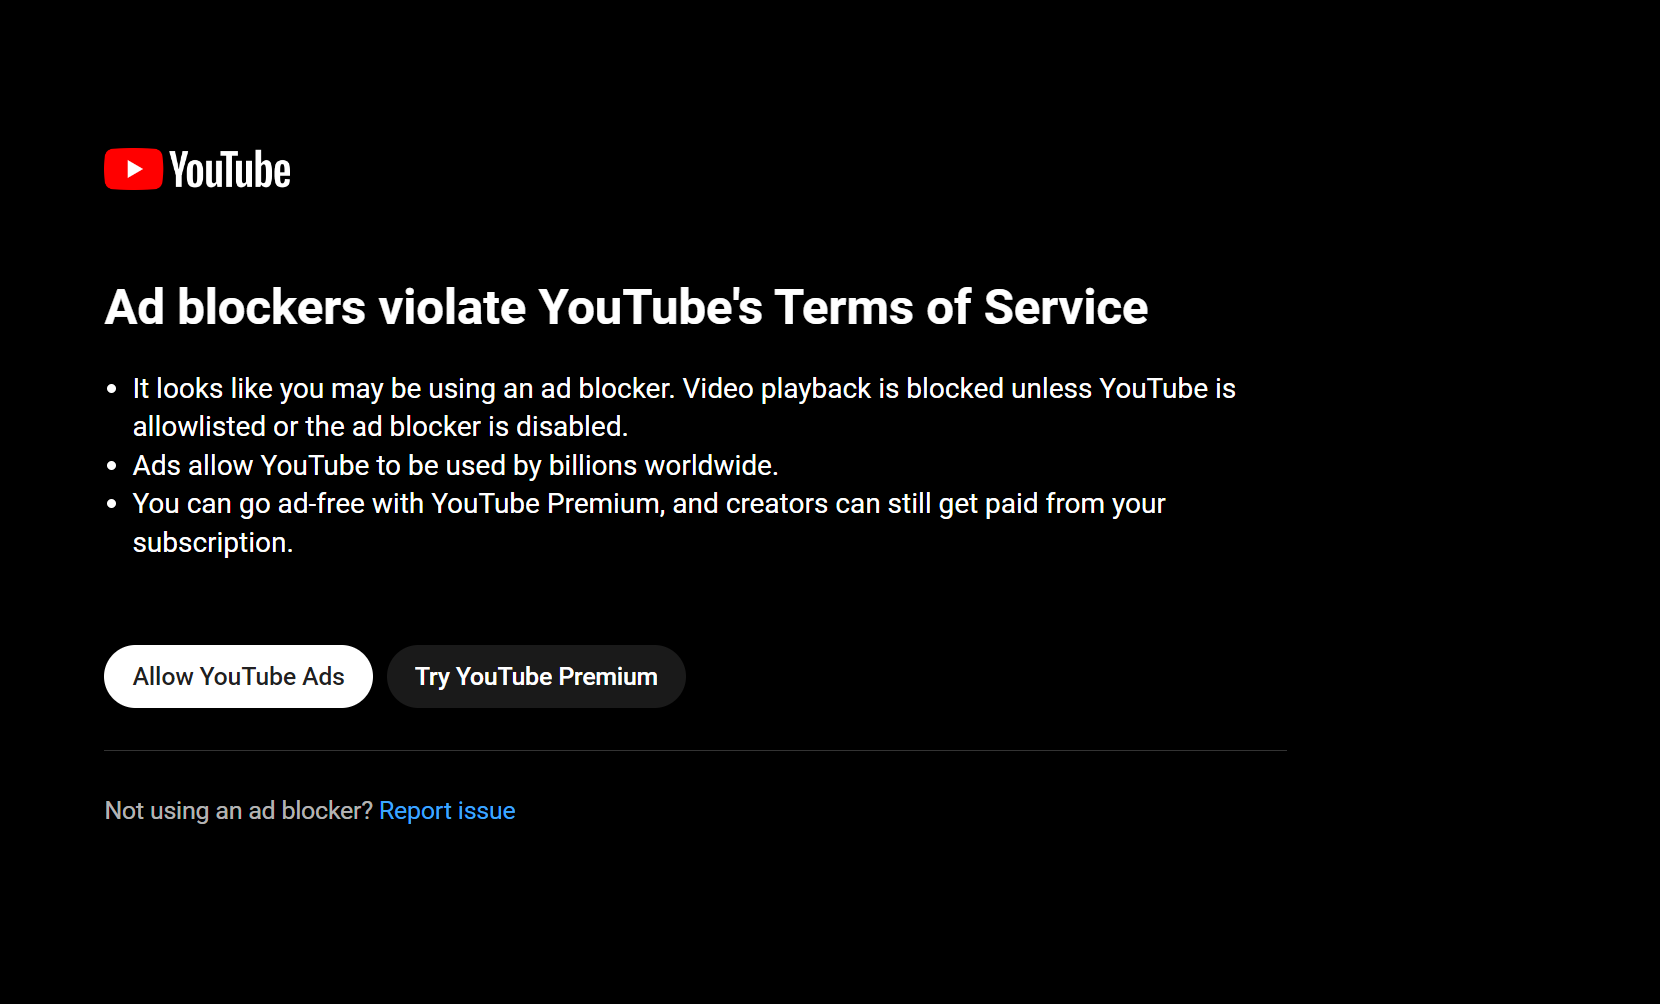 YouTube's crackdown on adblockers now includes videos skipping to the end for affected users